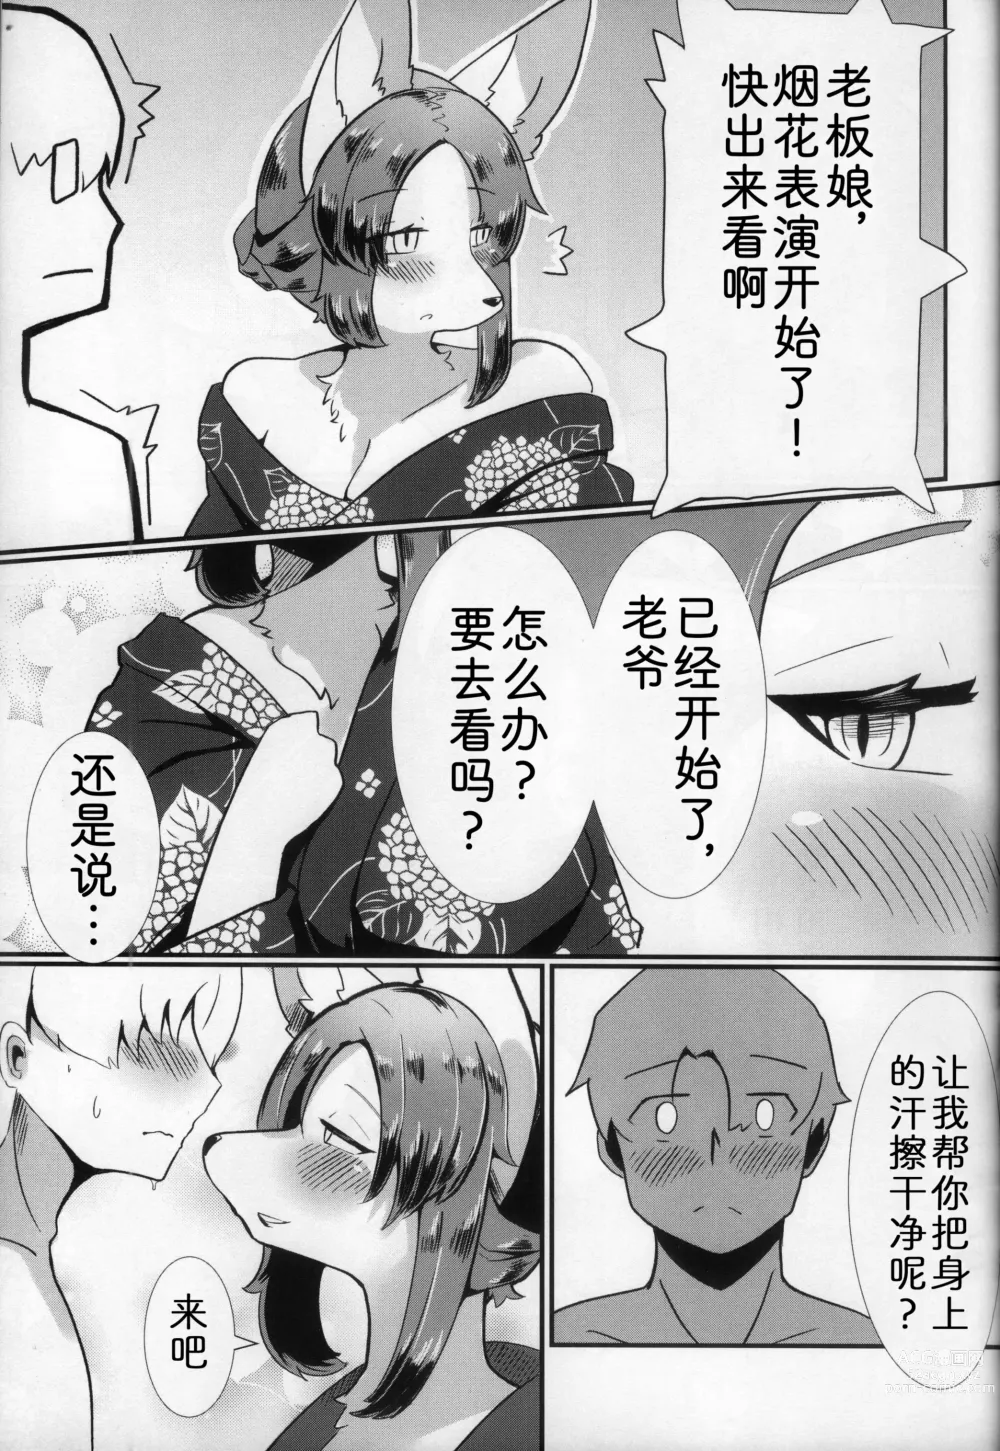 Page 11 of doujinshi 七彩之蝶